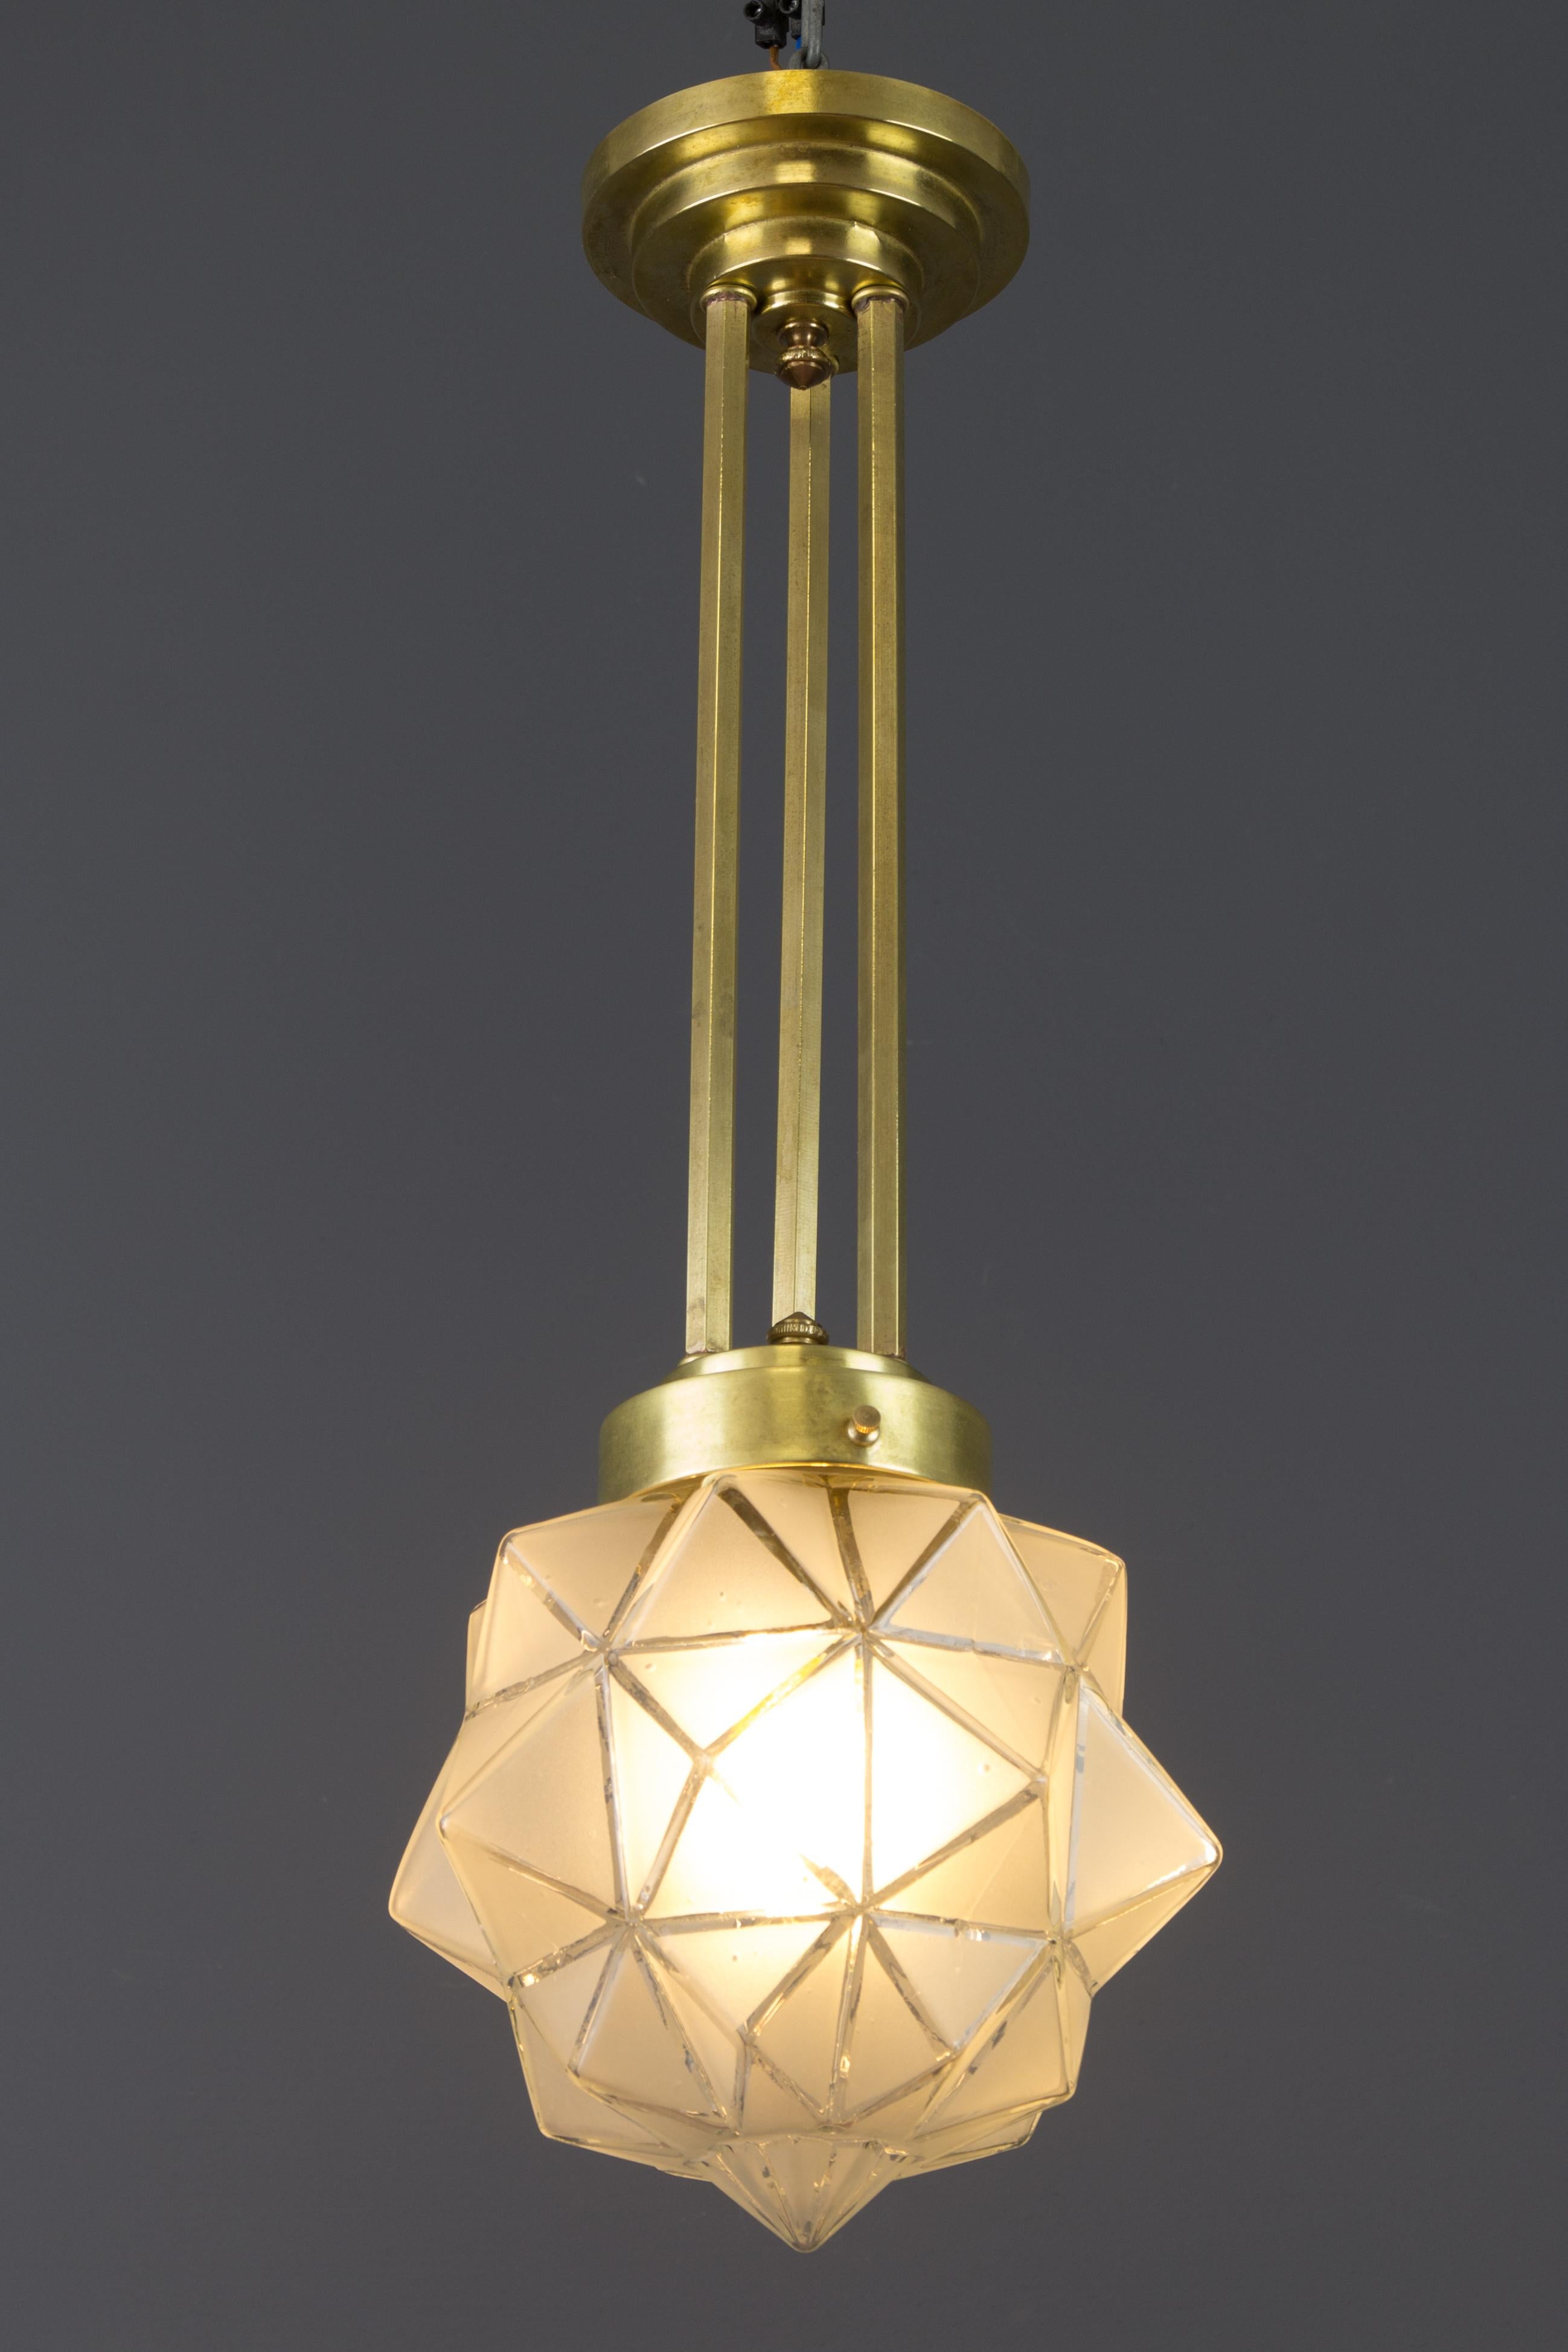 Elegant Art Deco pendant light fixture made of brass with beautifully geometric, polygonal-shaped frosted glass shade. Made in France, in the 1930s.
One socket for a B22-size light bulb.
Dimensions: height 52 cm / 20.47 in; diameter 19 cm / 7.48 in.